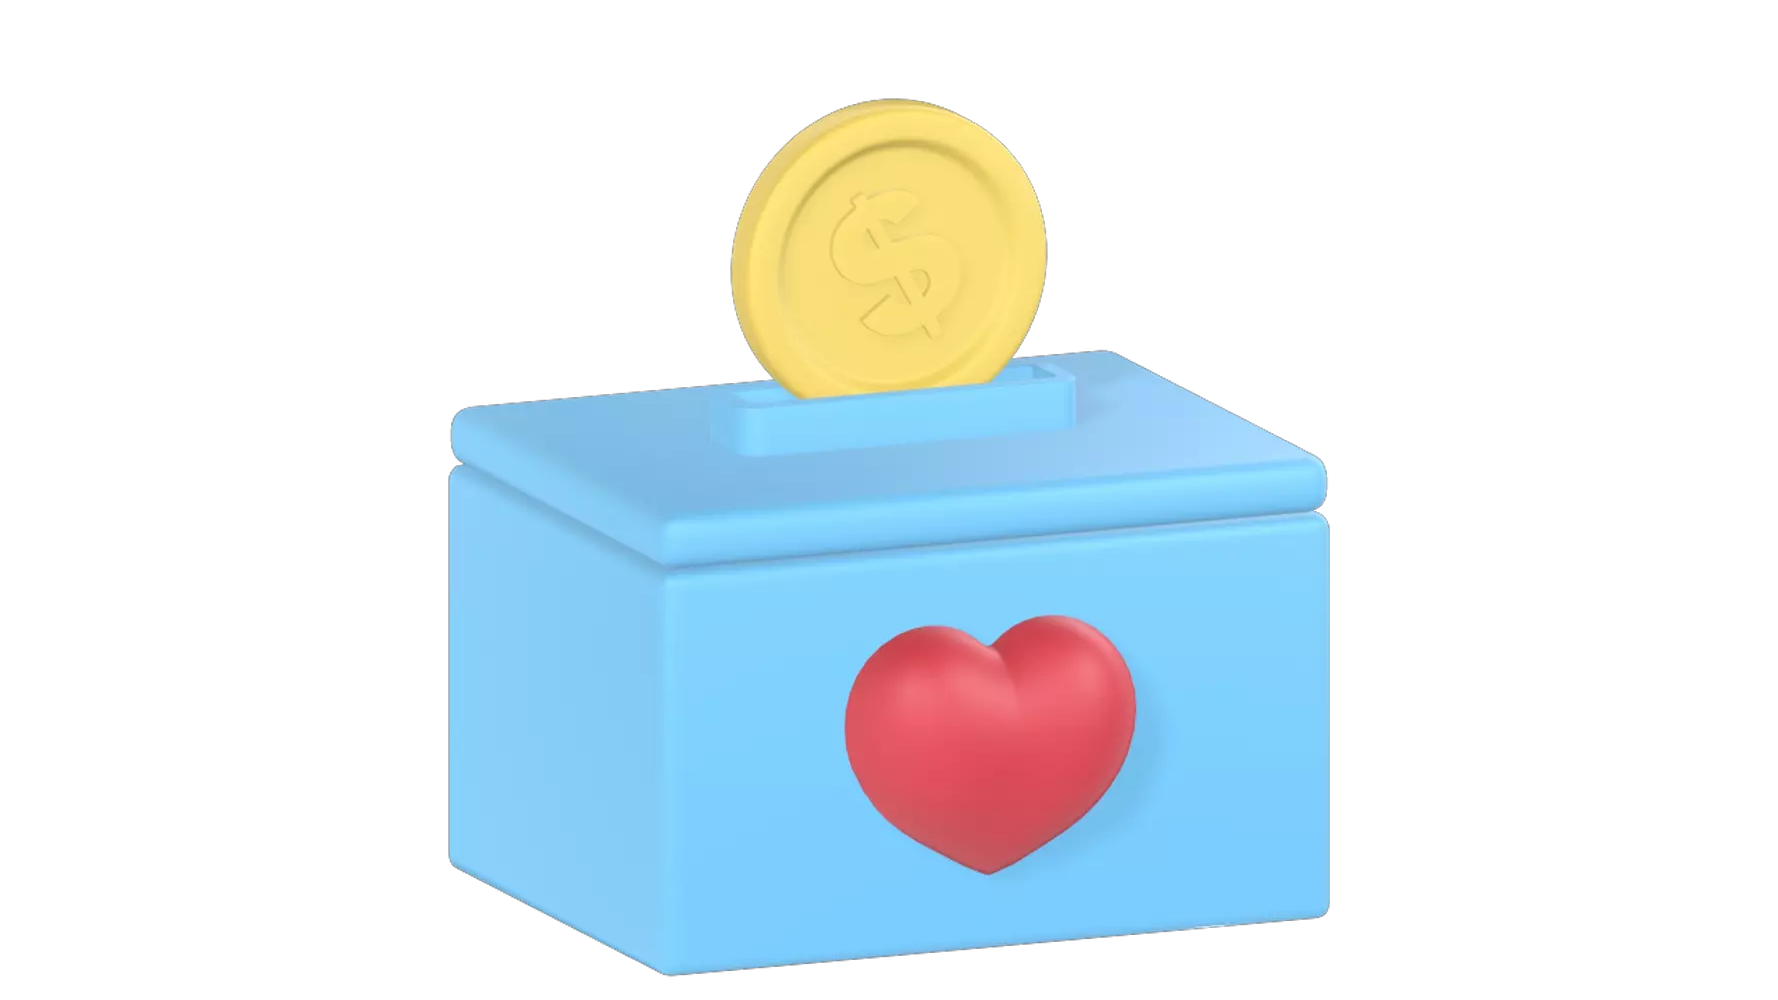 Charity Box 3D Graphic